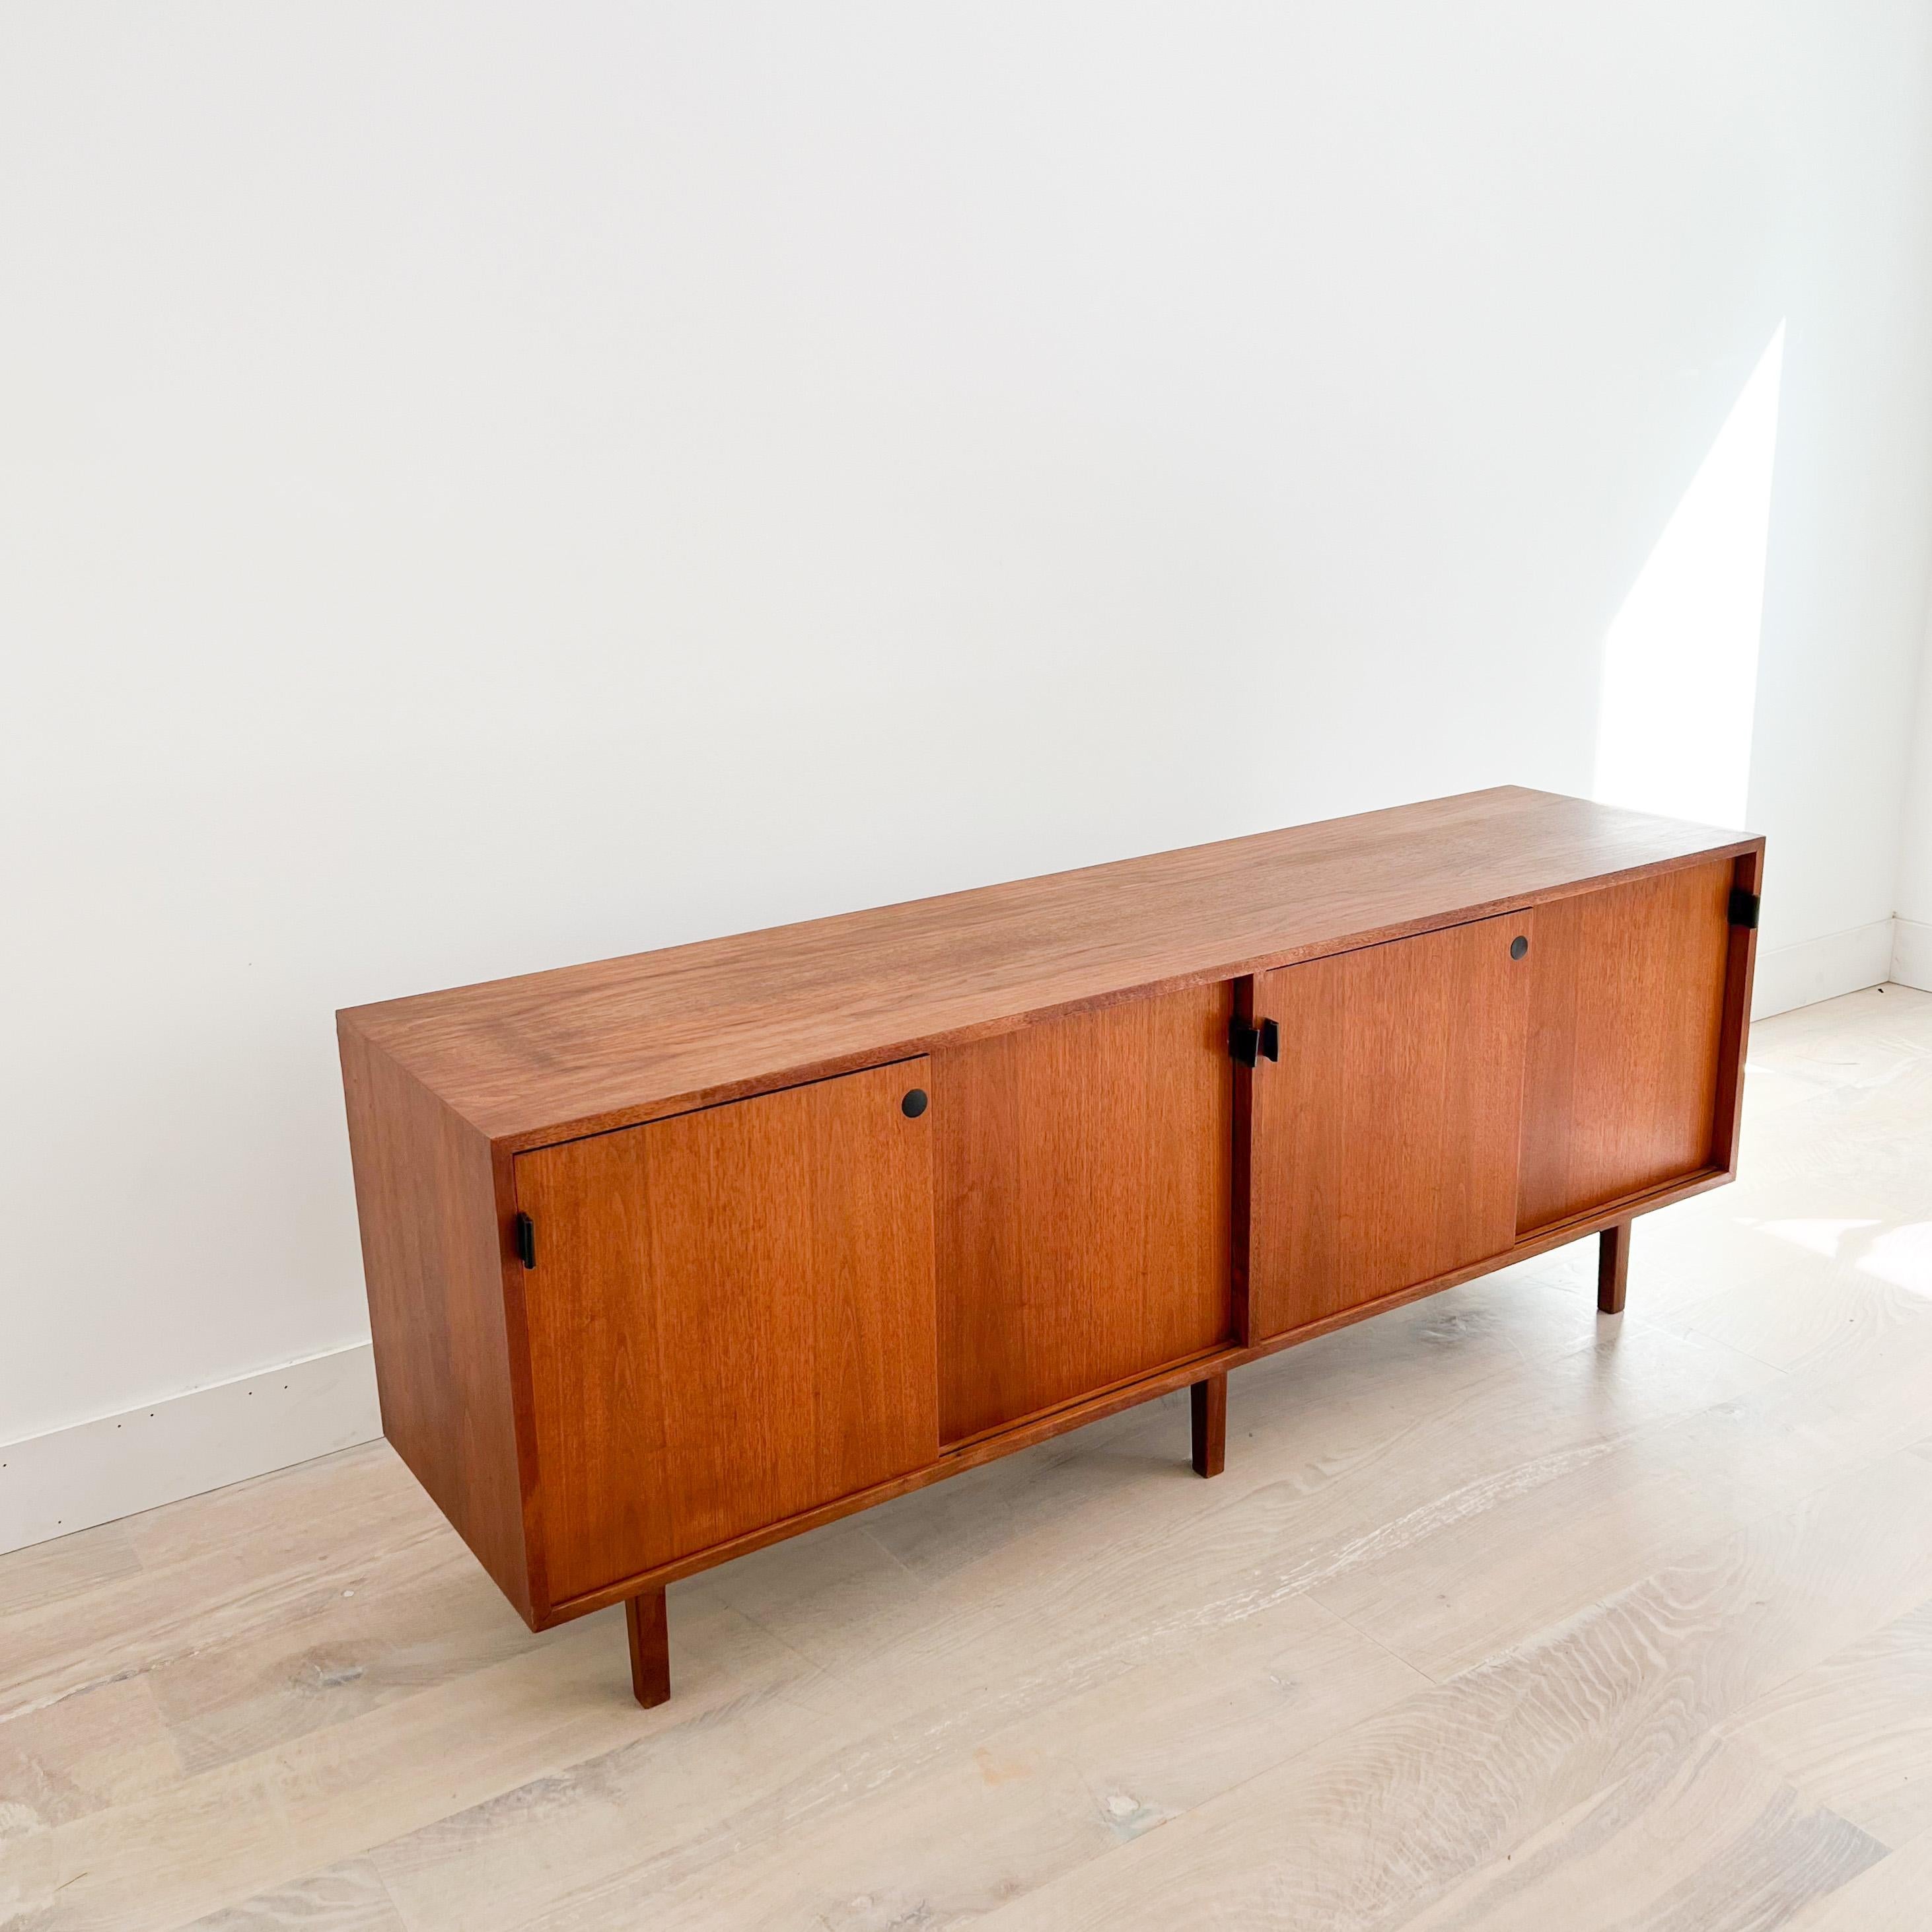 Mid-Century Modern credenza with black leather door pulls by Knoll. It’s kind of rare to find these with the wood veneer tops rather than the Formica. The top has been sanded and restored. Some light scuffing/scratching/small areas of veneer repair